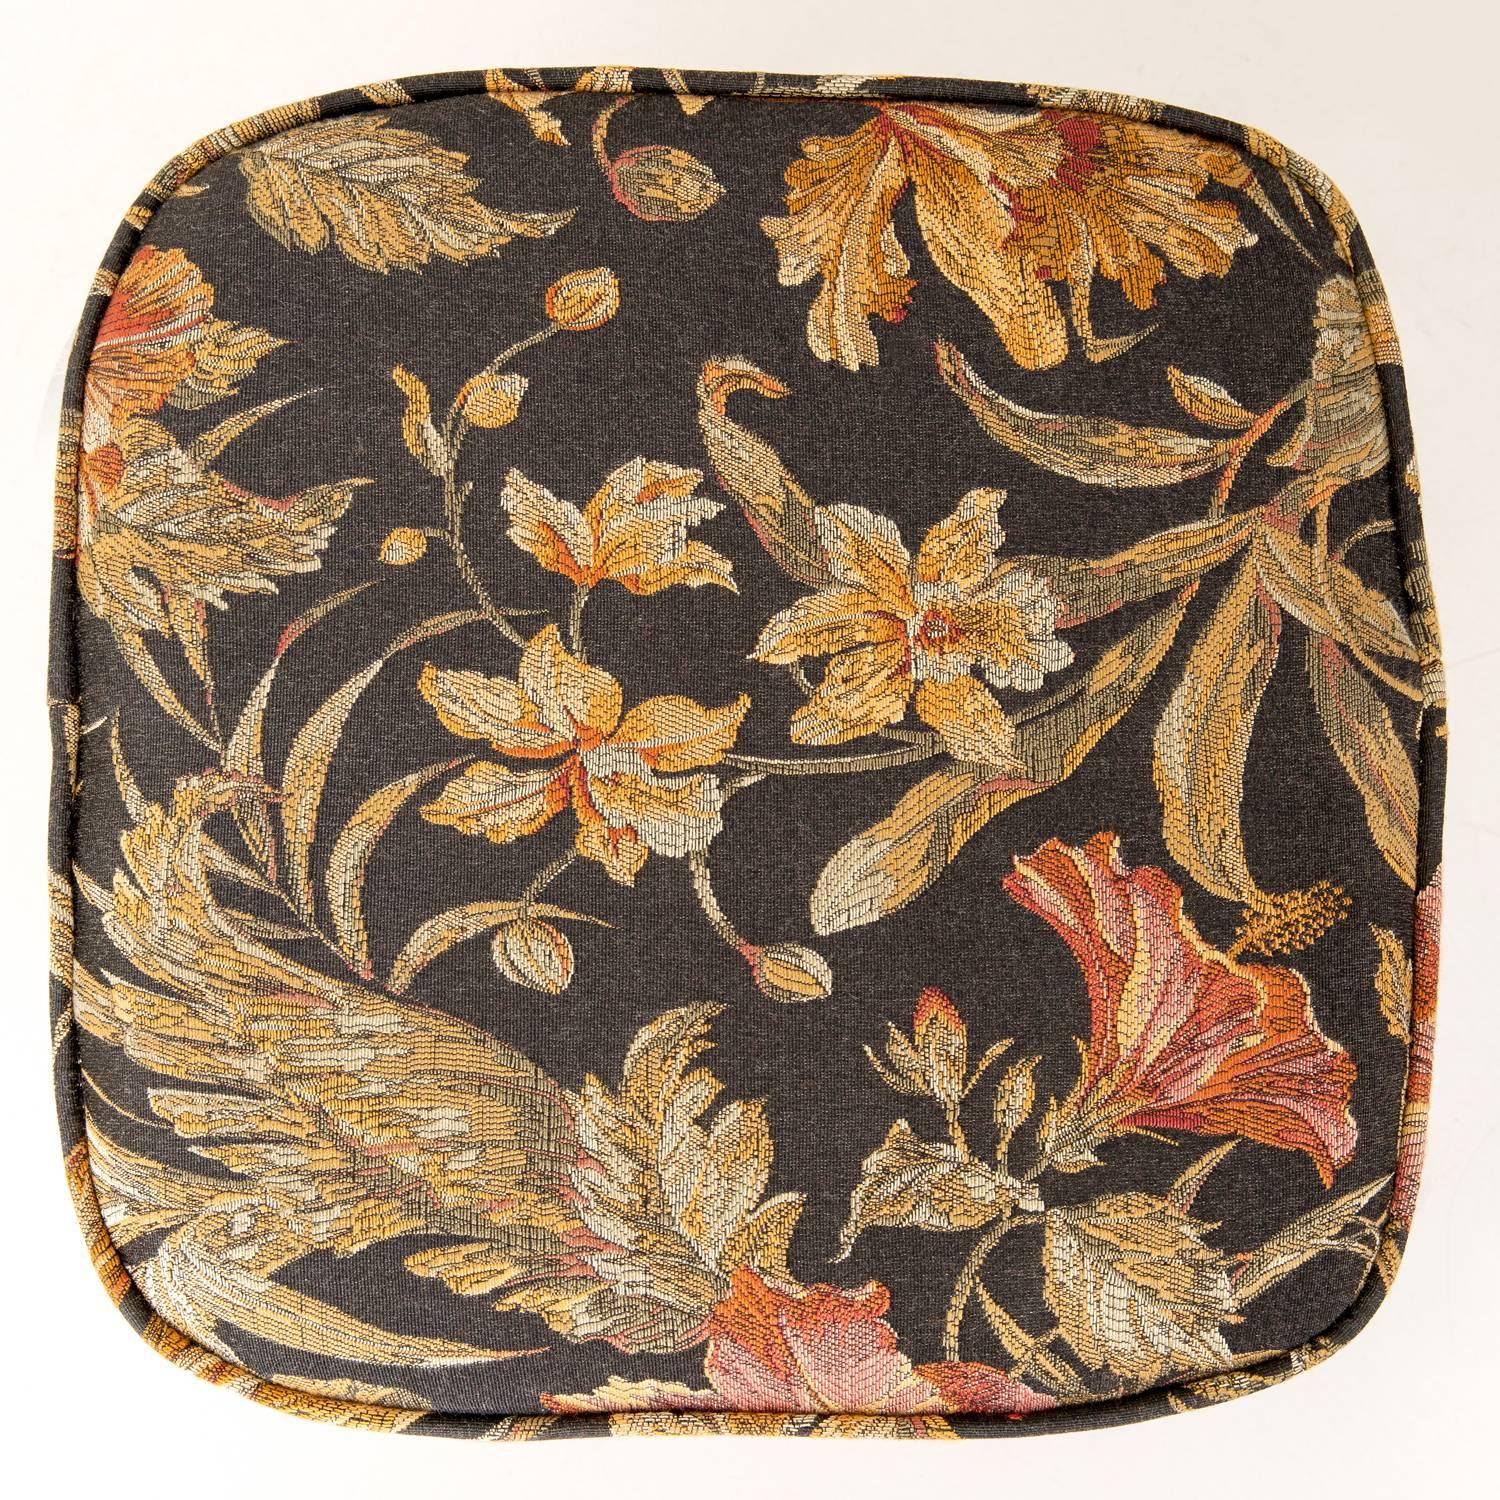 Hand-Crafted Mid Century Black Floral Stool, Europe 1960s